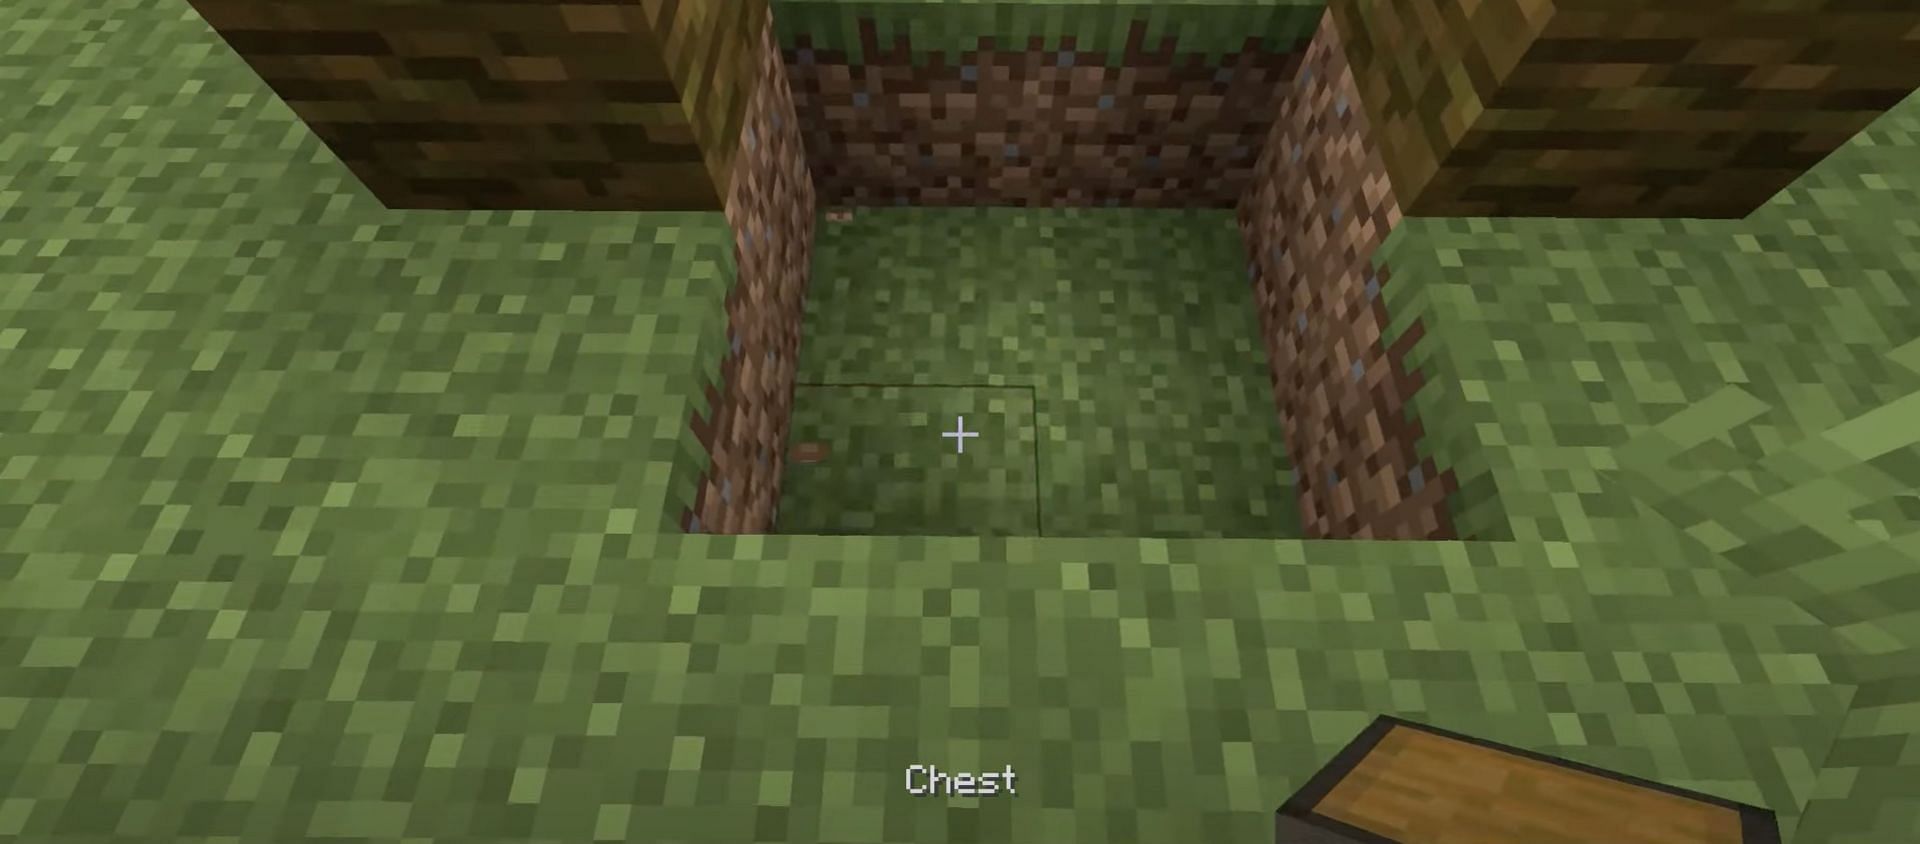 Players need to dig holes in front to place the chests and hoppers (Image via NaMiature/YouTube)